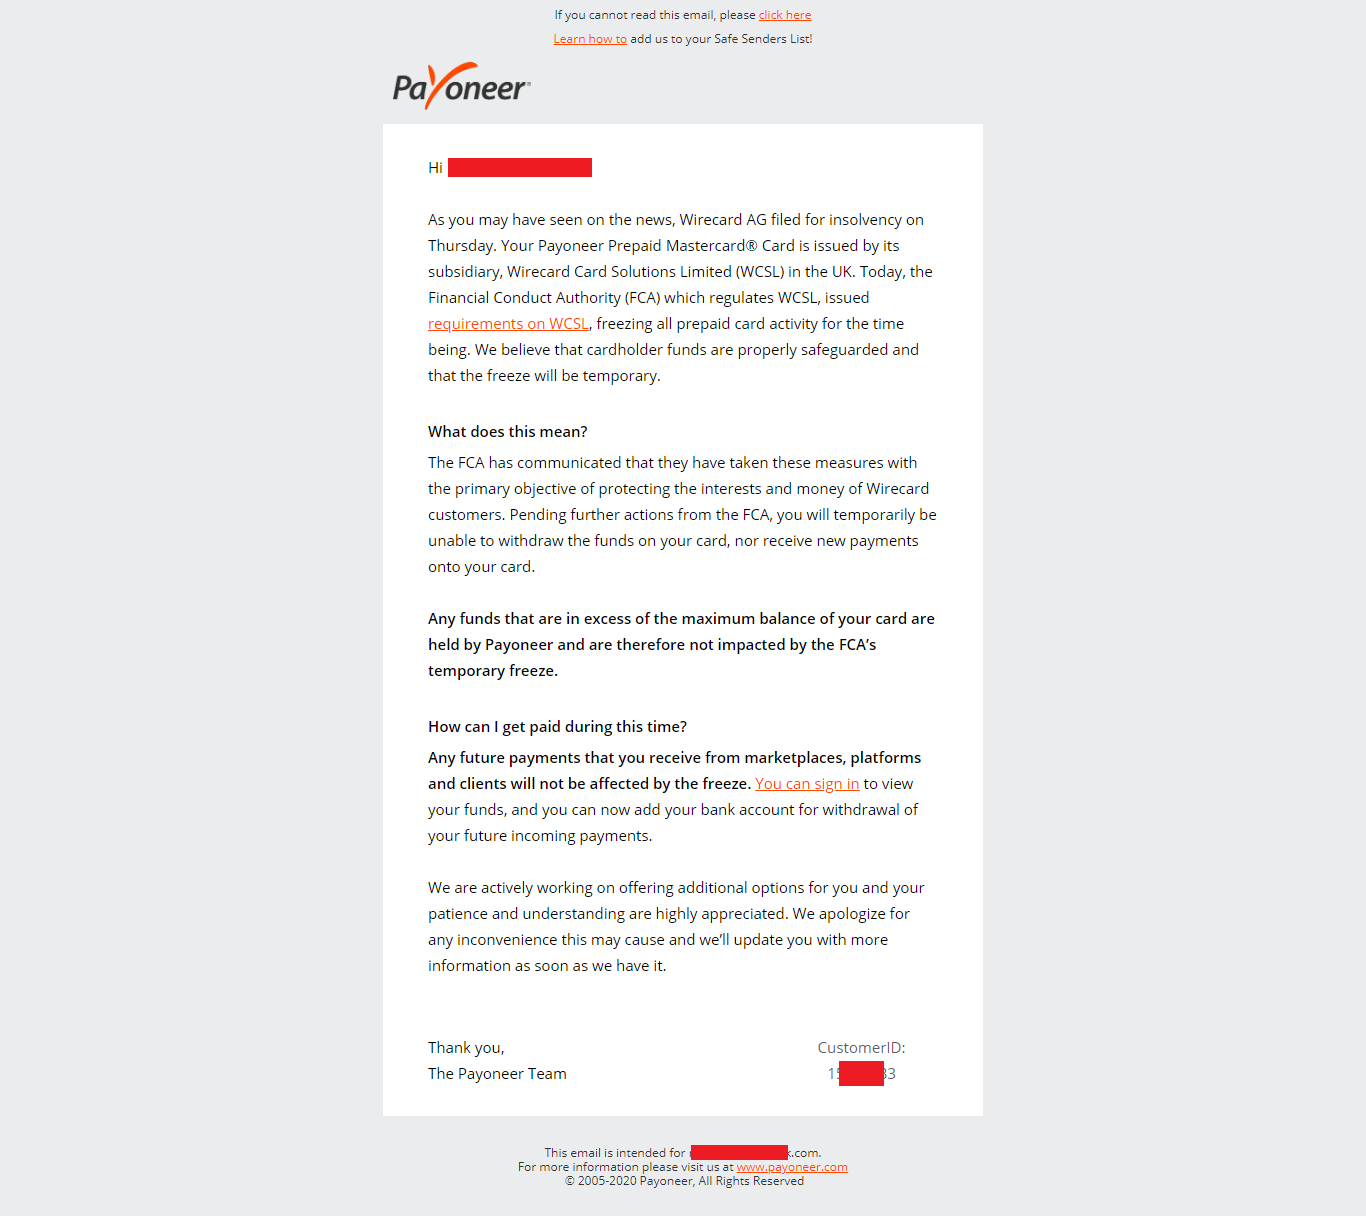 Payoneer email regarding Wirecard insolvency scandal